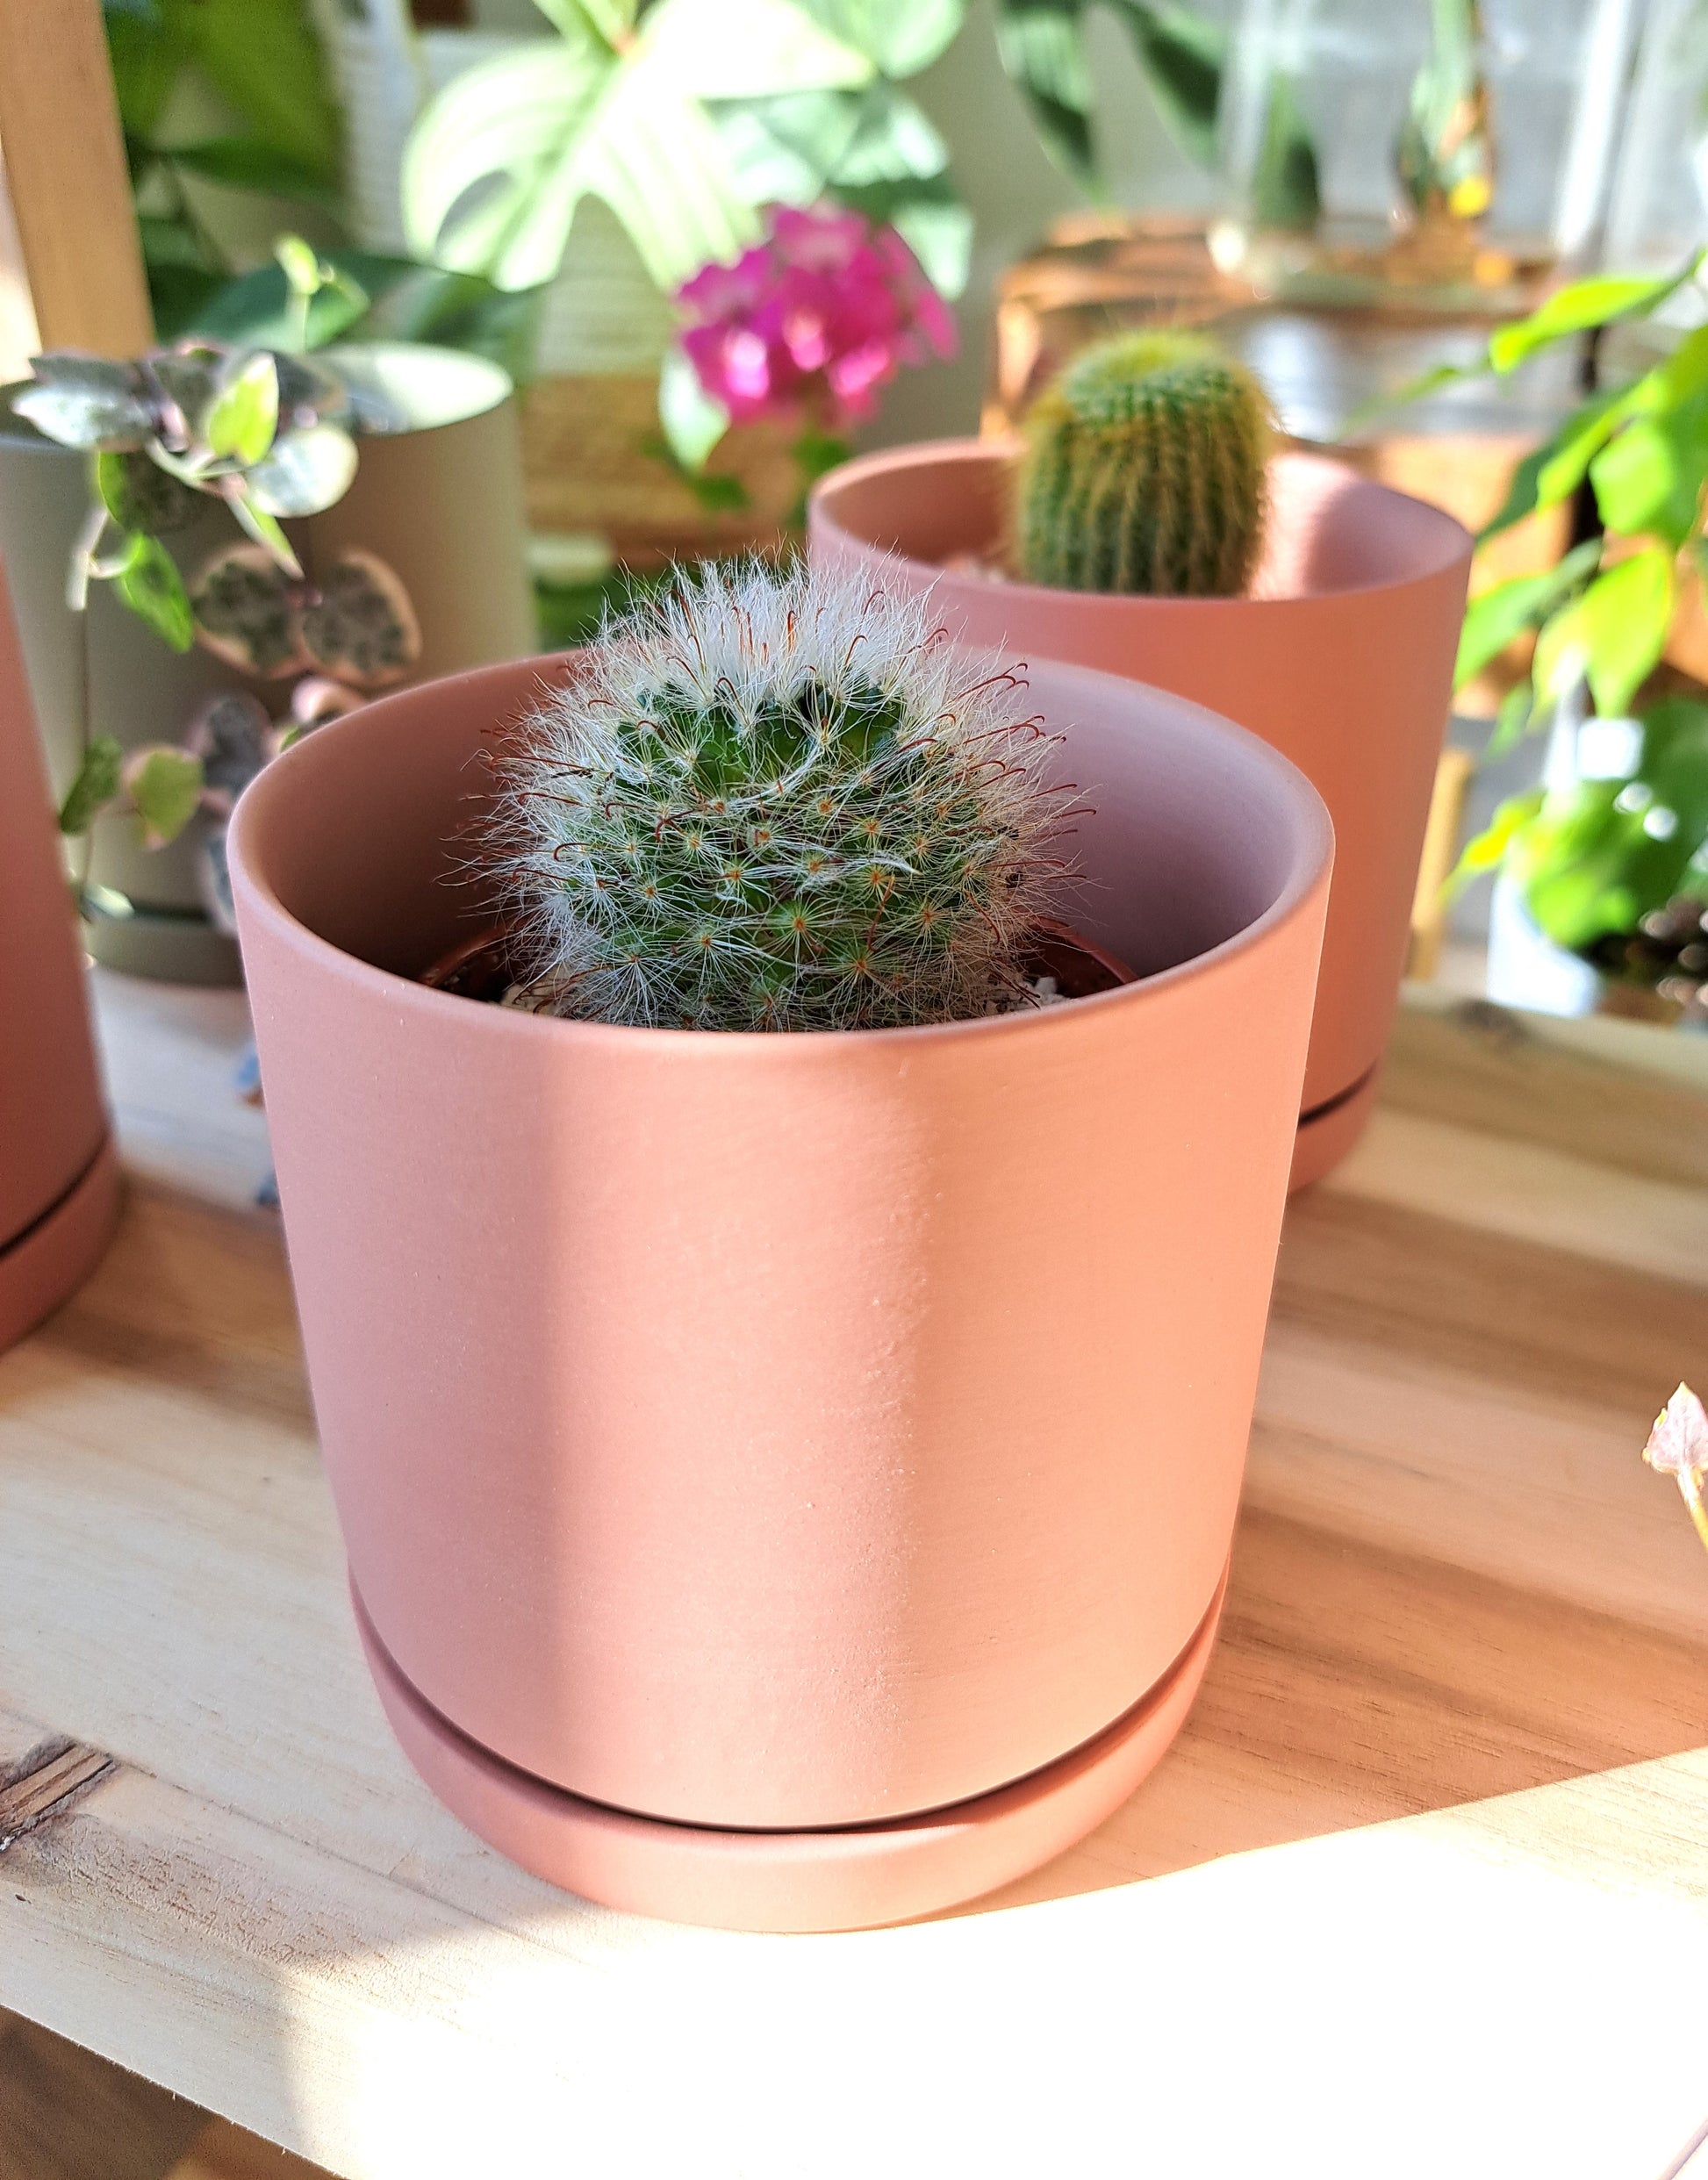 Assorted plants in 3.5" clay pots. With a pastel, completely matte finish, these clay pots have a modern, boho feel. Pots are available in blush pink or sage green and each pot comes with a drainage hole and saucer.  Plants include cacti, variegated string of hearts, and hoya mathilde. The plants pictured are the ones you will receive. Each item includes a plant in a plastic nursery pot as well as a clay pot.